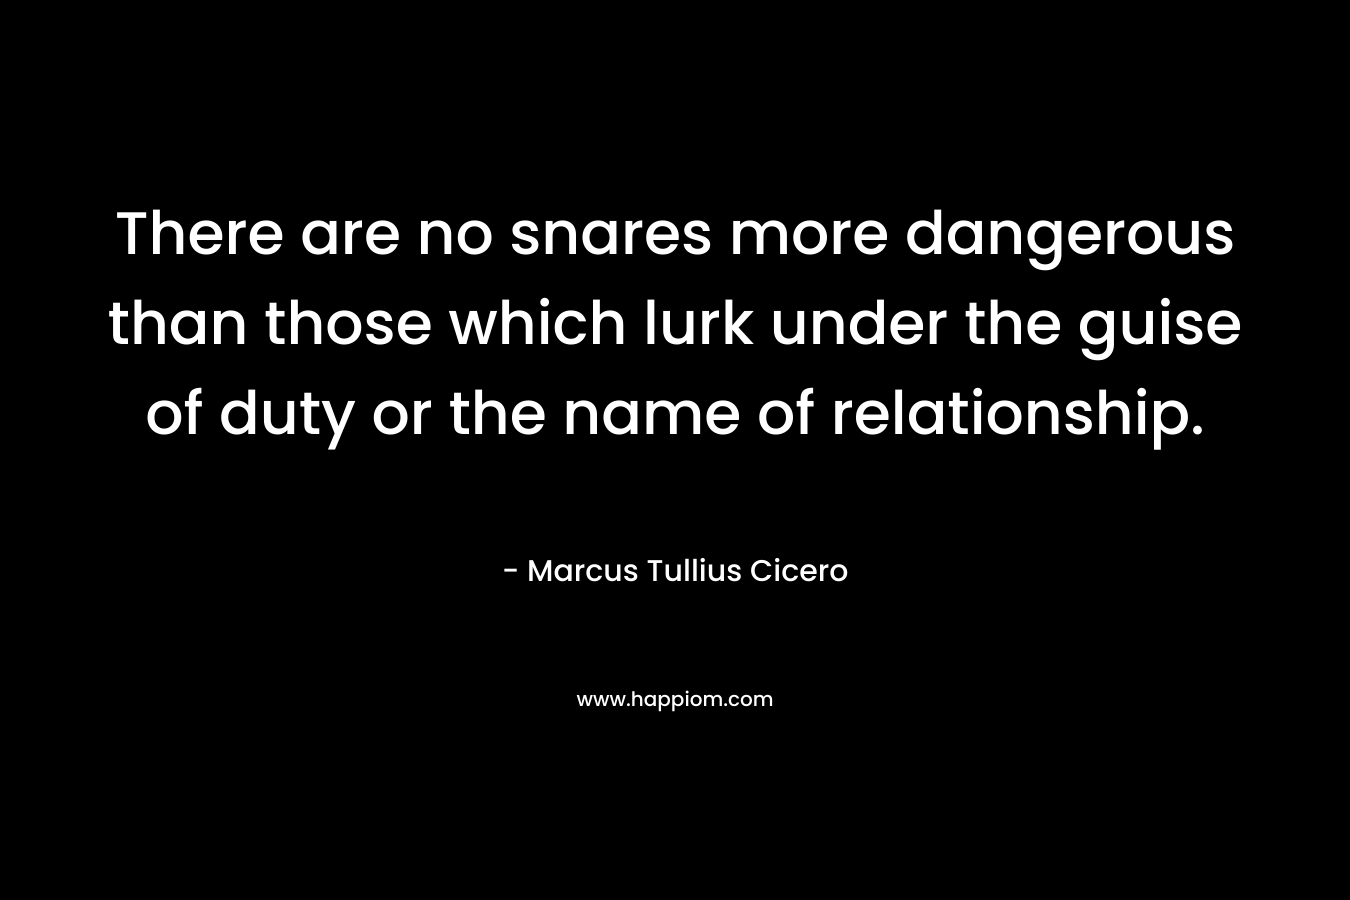 There are no snares more dangerous than those which lurk under the guise of duty or the name of relationship. – Marcus Tullius Cicero